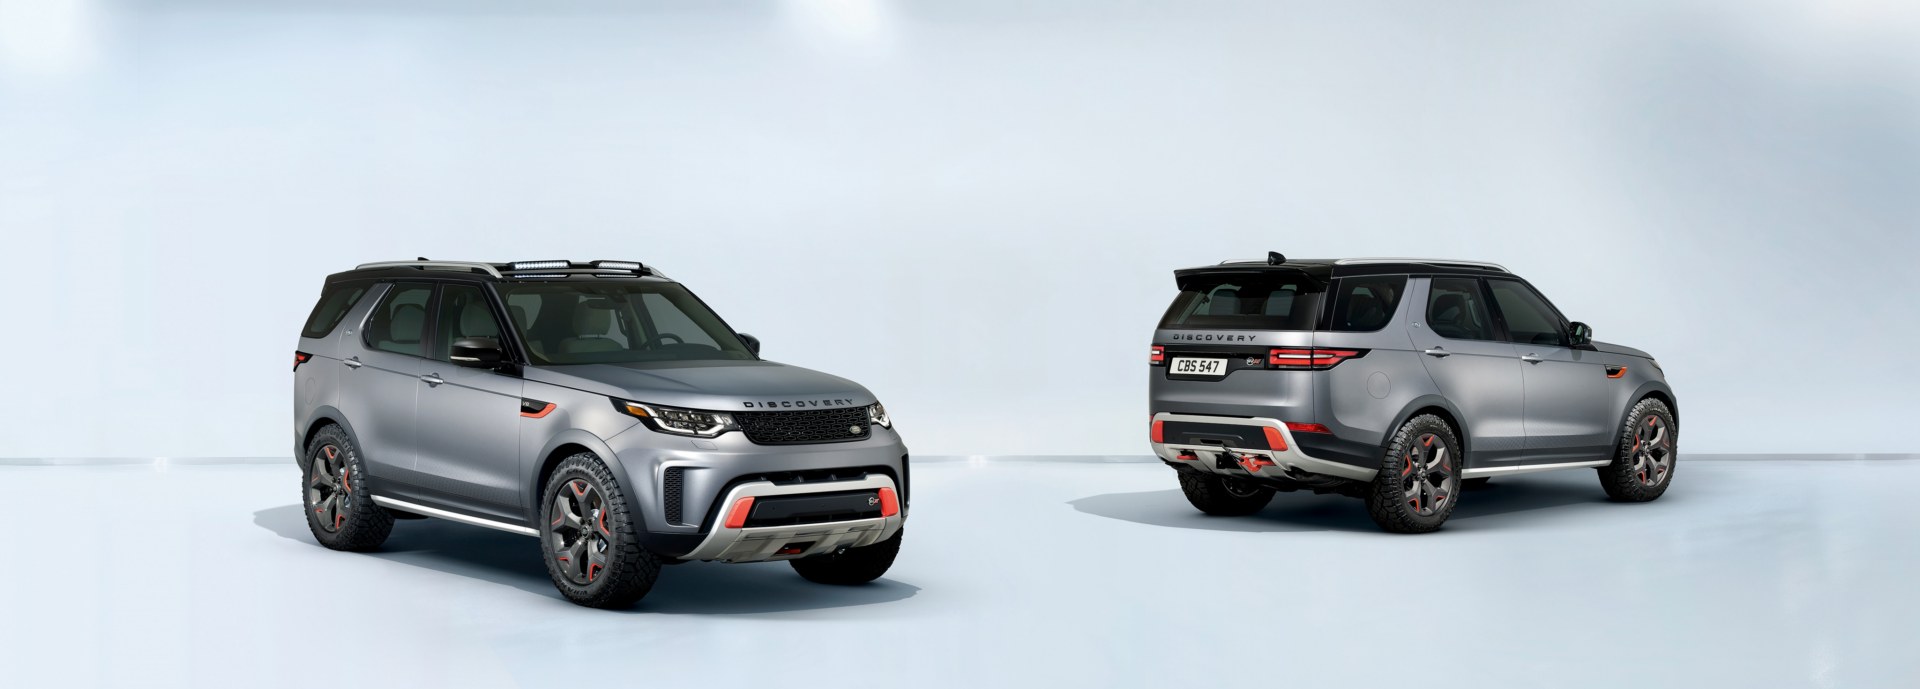 land_rover_discovery_svx